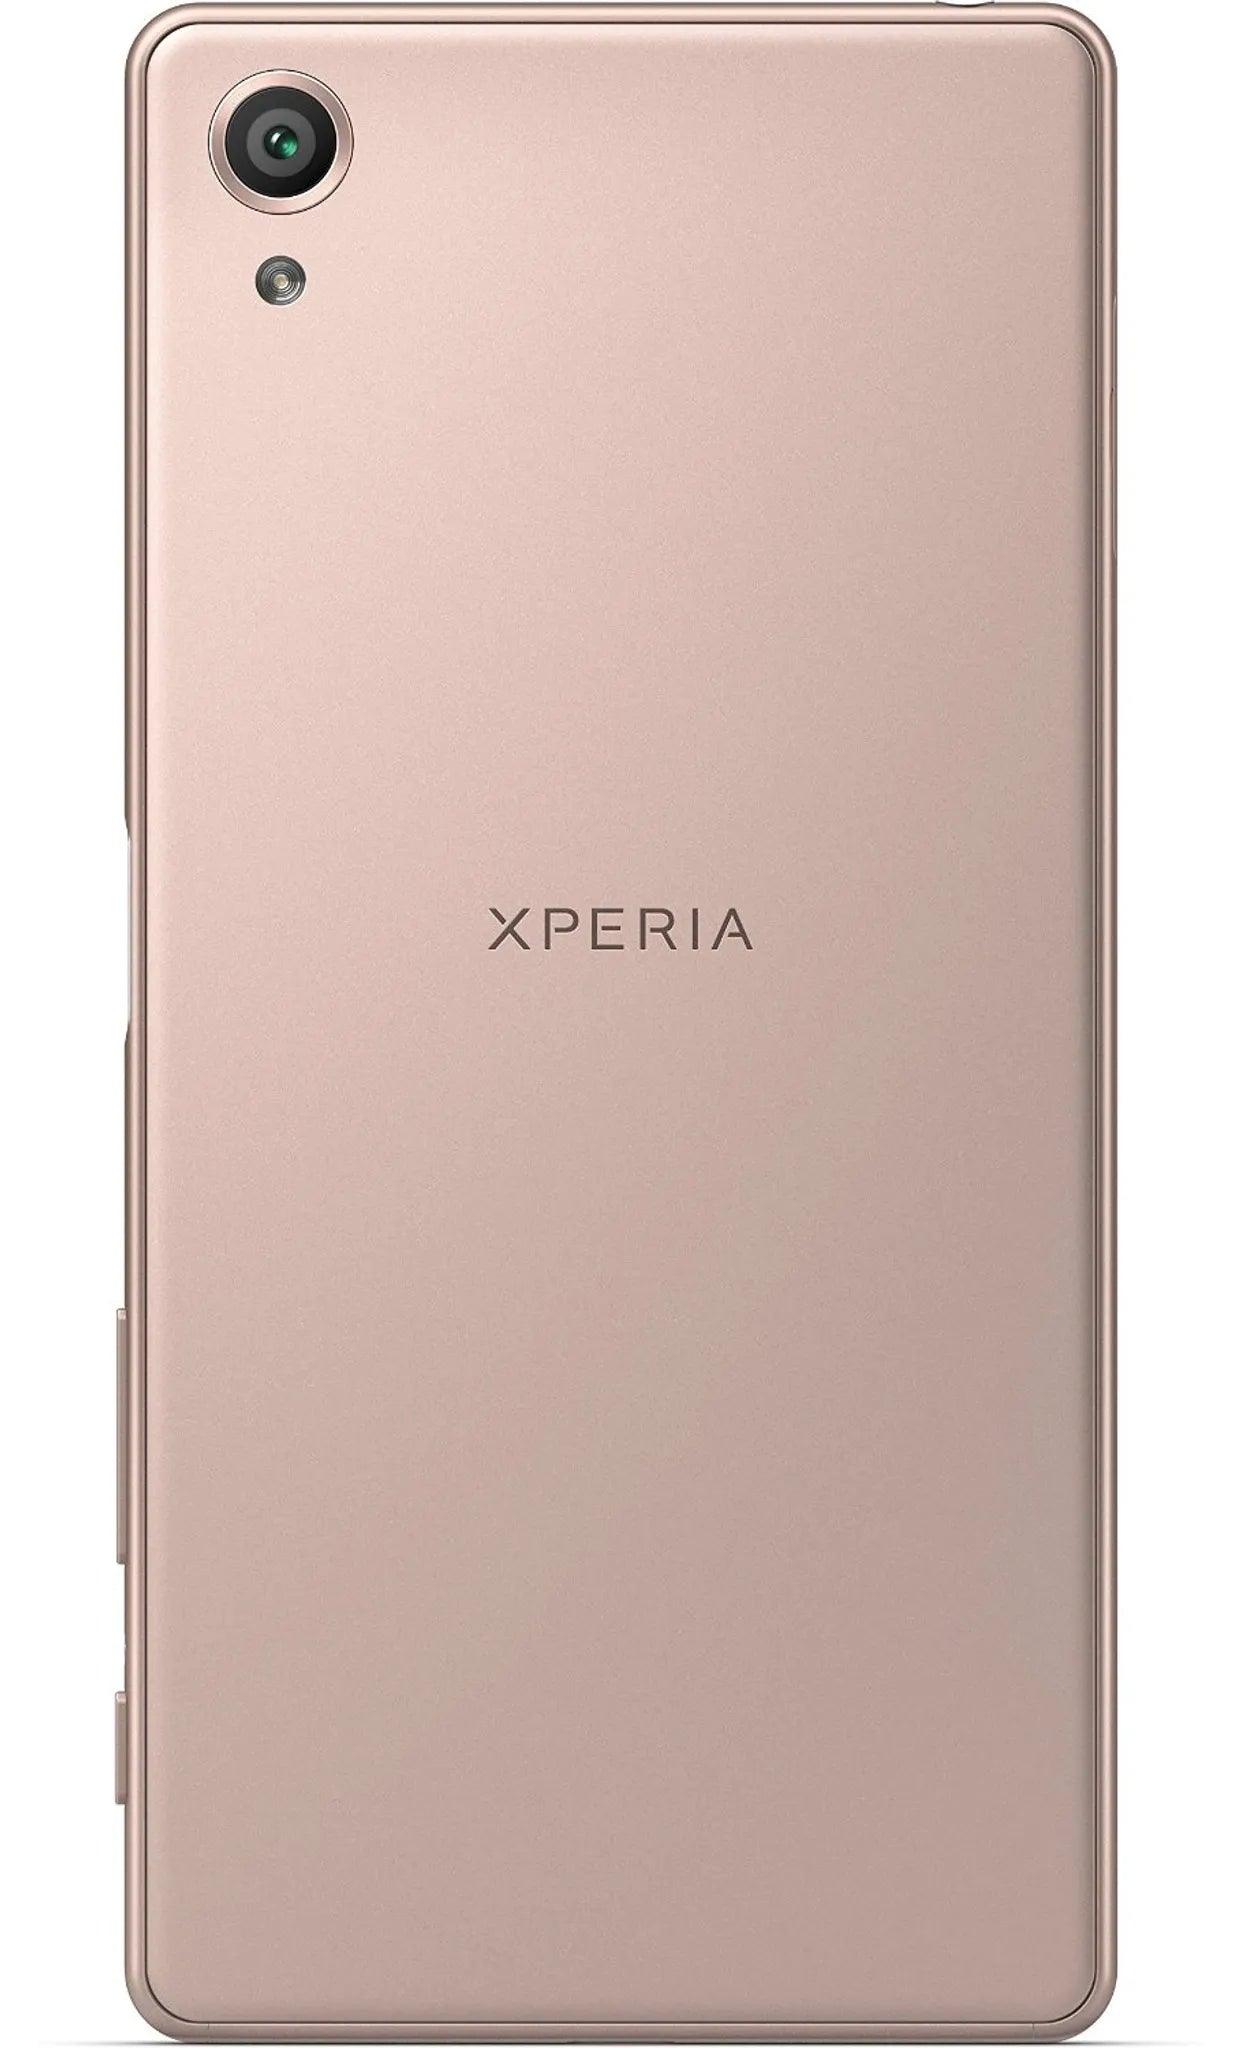 Sony Xperia X Single SIM Rose Gold - CarbonPhone